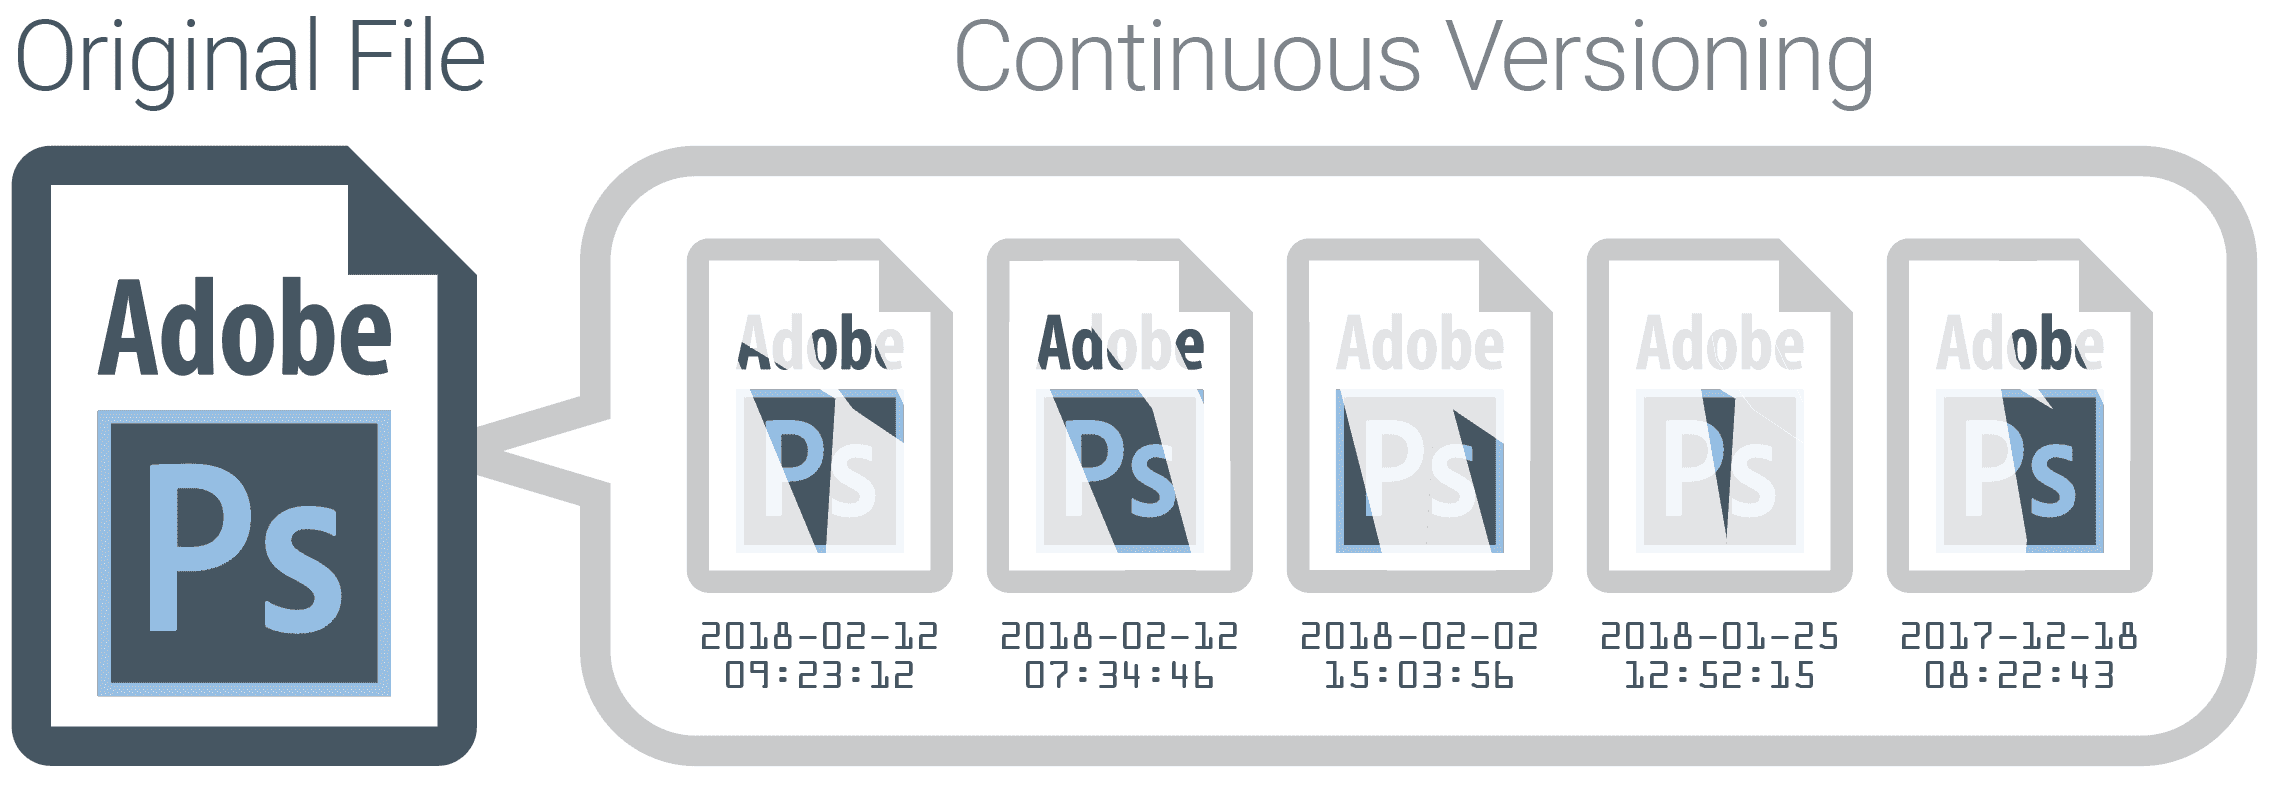 Continuous File Versioning